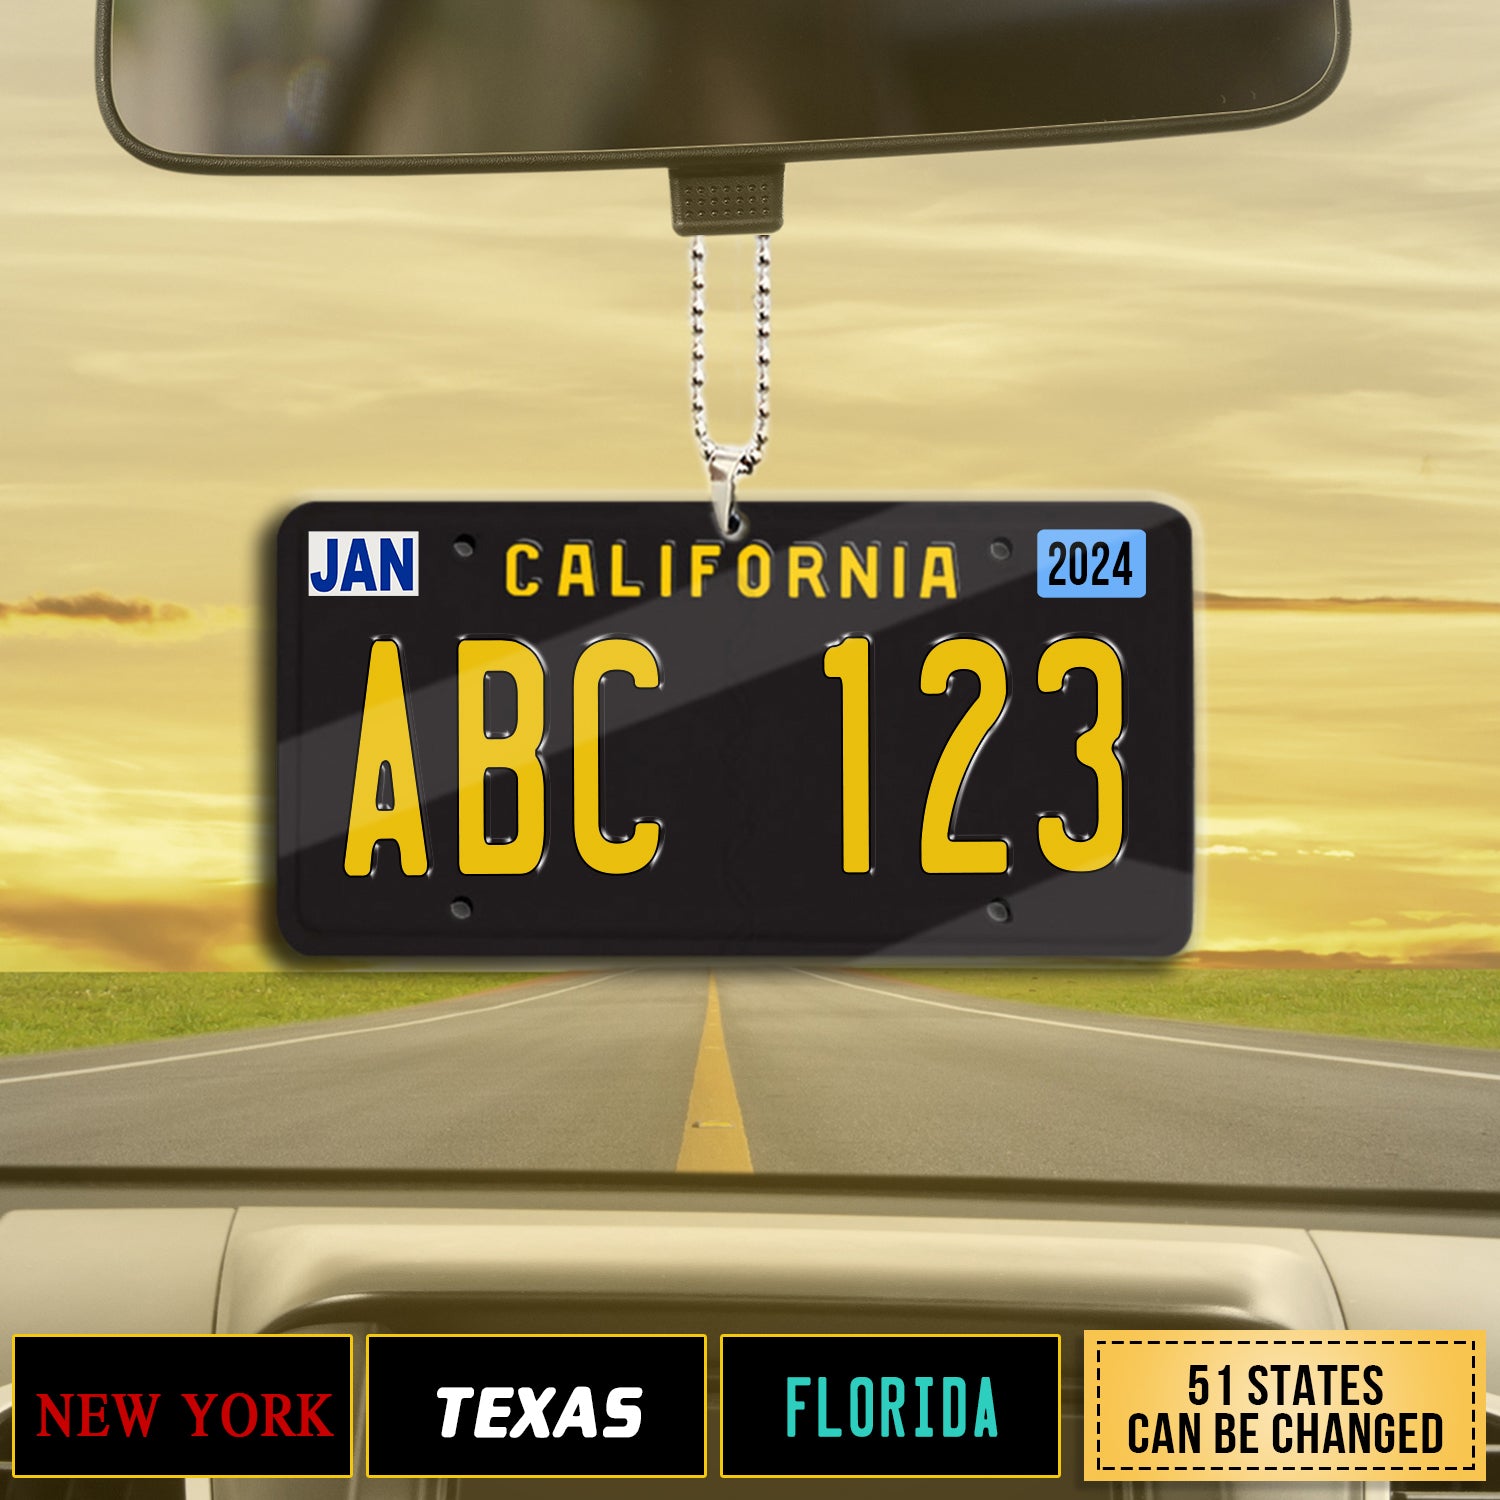 Black License Plate For Any State - Personalized Car Ornament